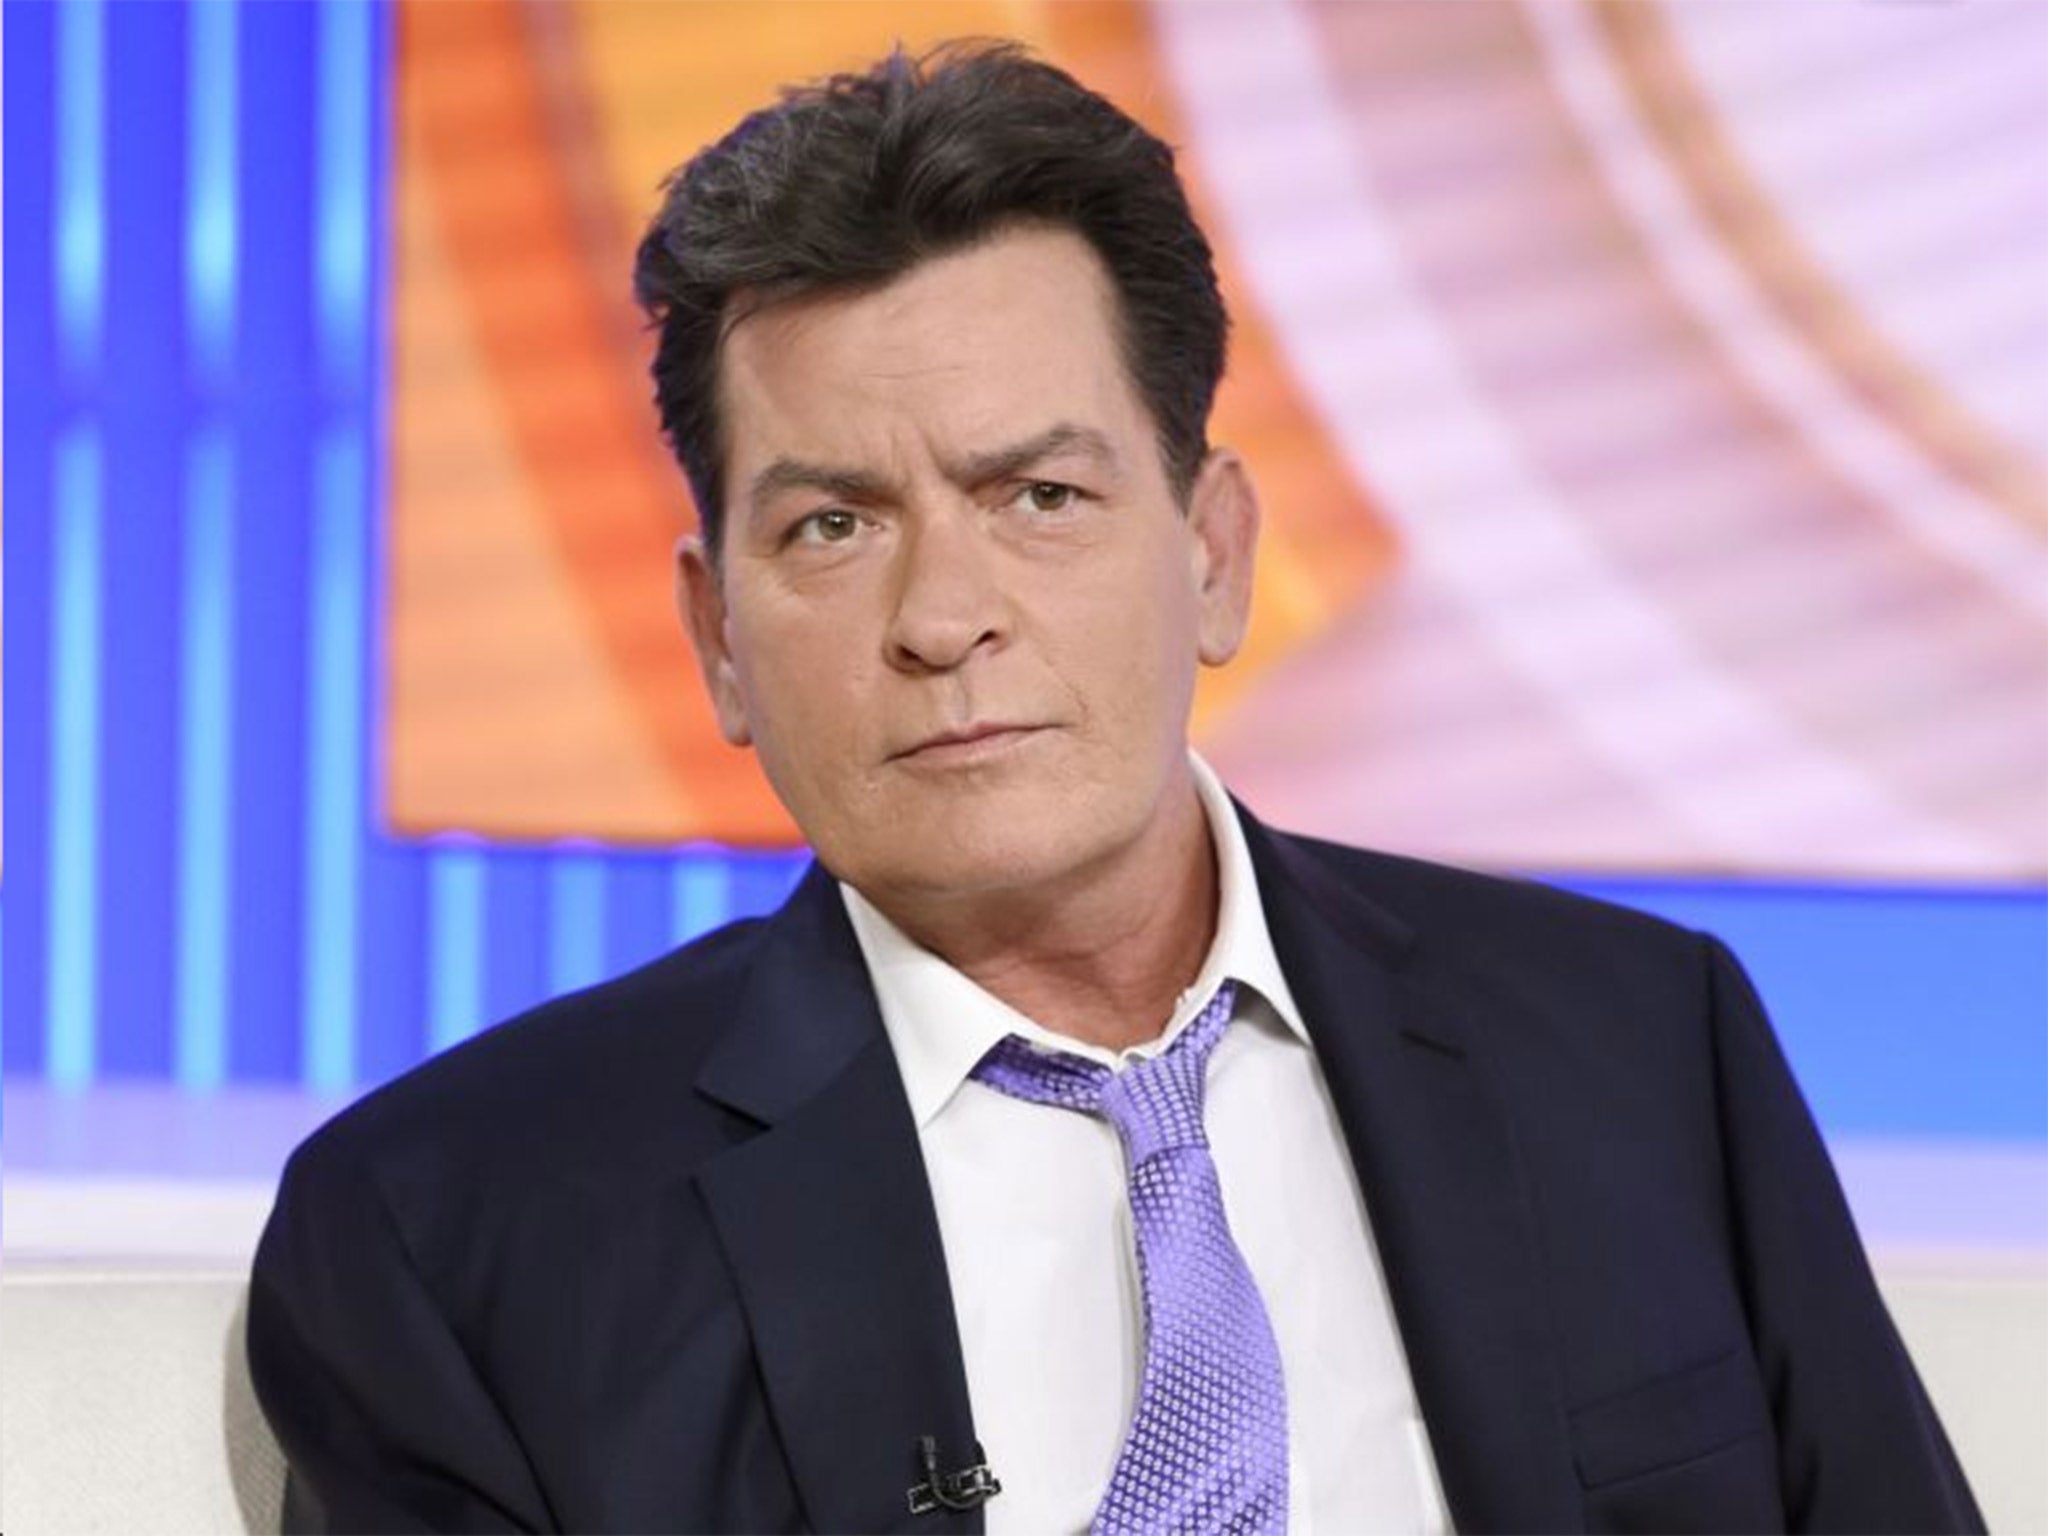 Charlie Sheen Porn stars demand list of actors sexual partners following HIV-positive status announcement The Independent The Independent photo